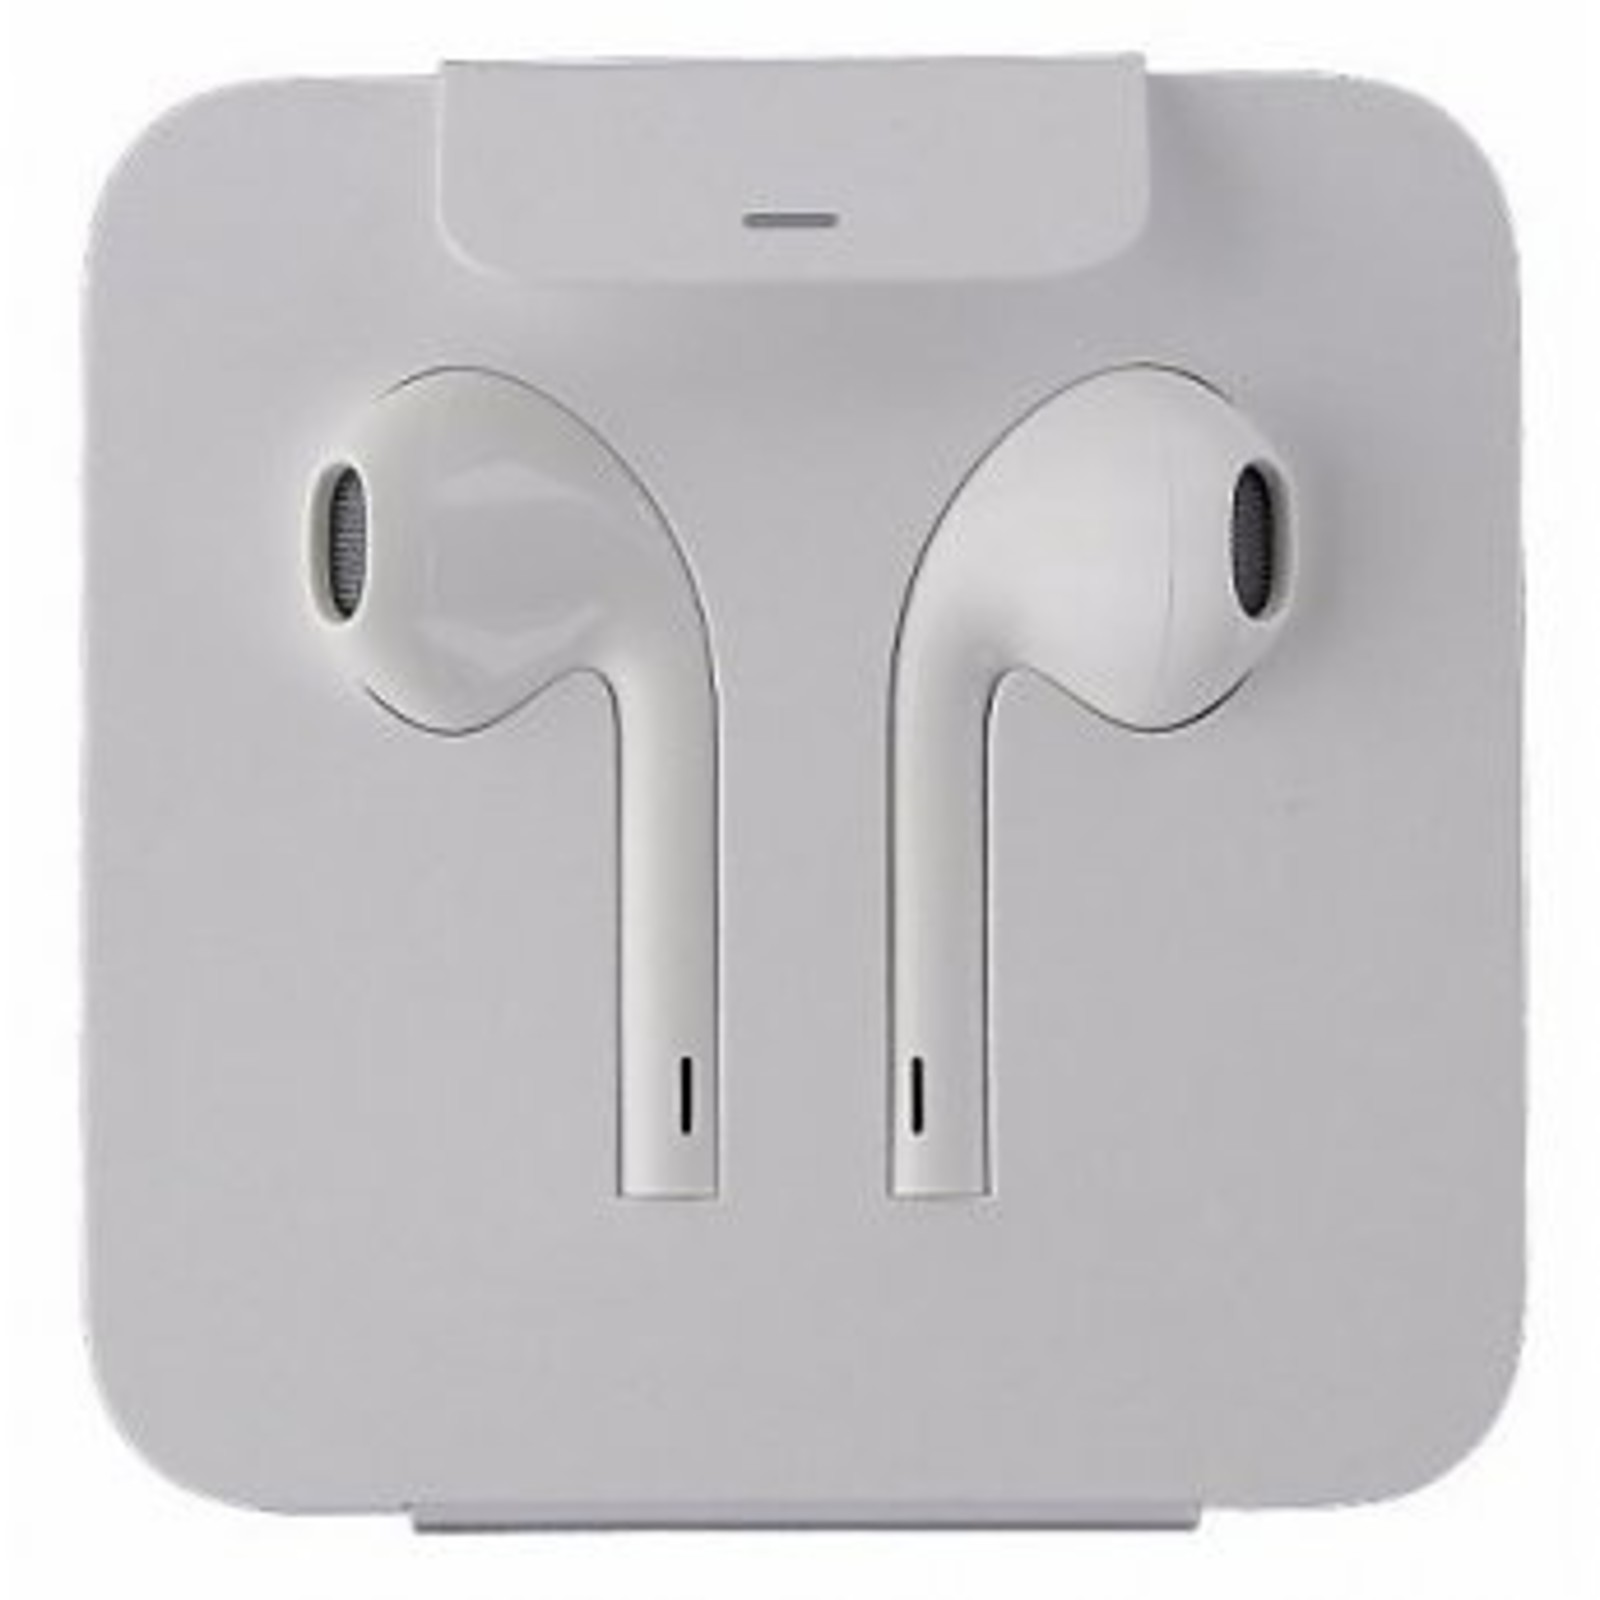 Apple Apple earbuds White